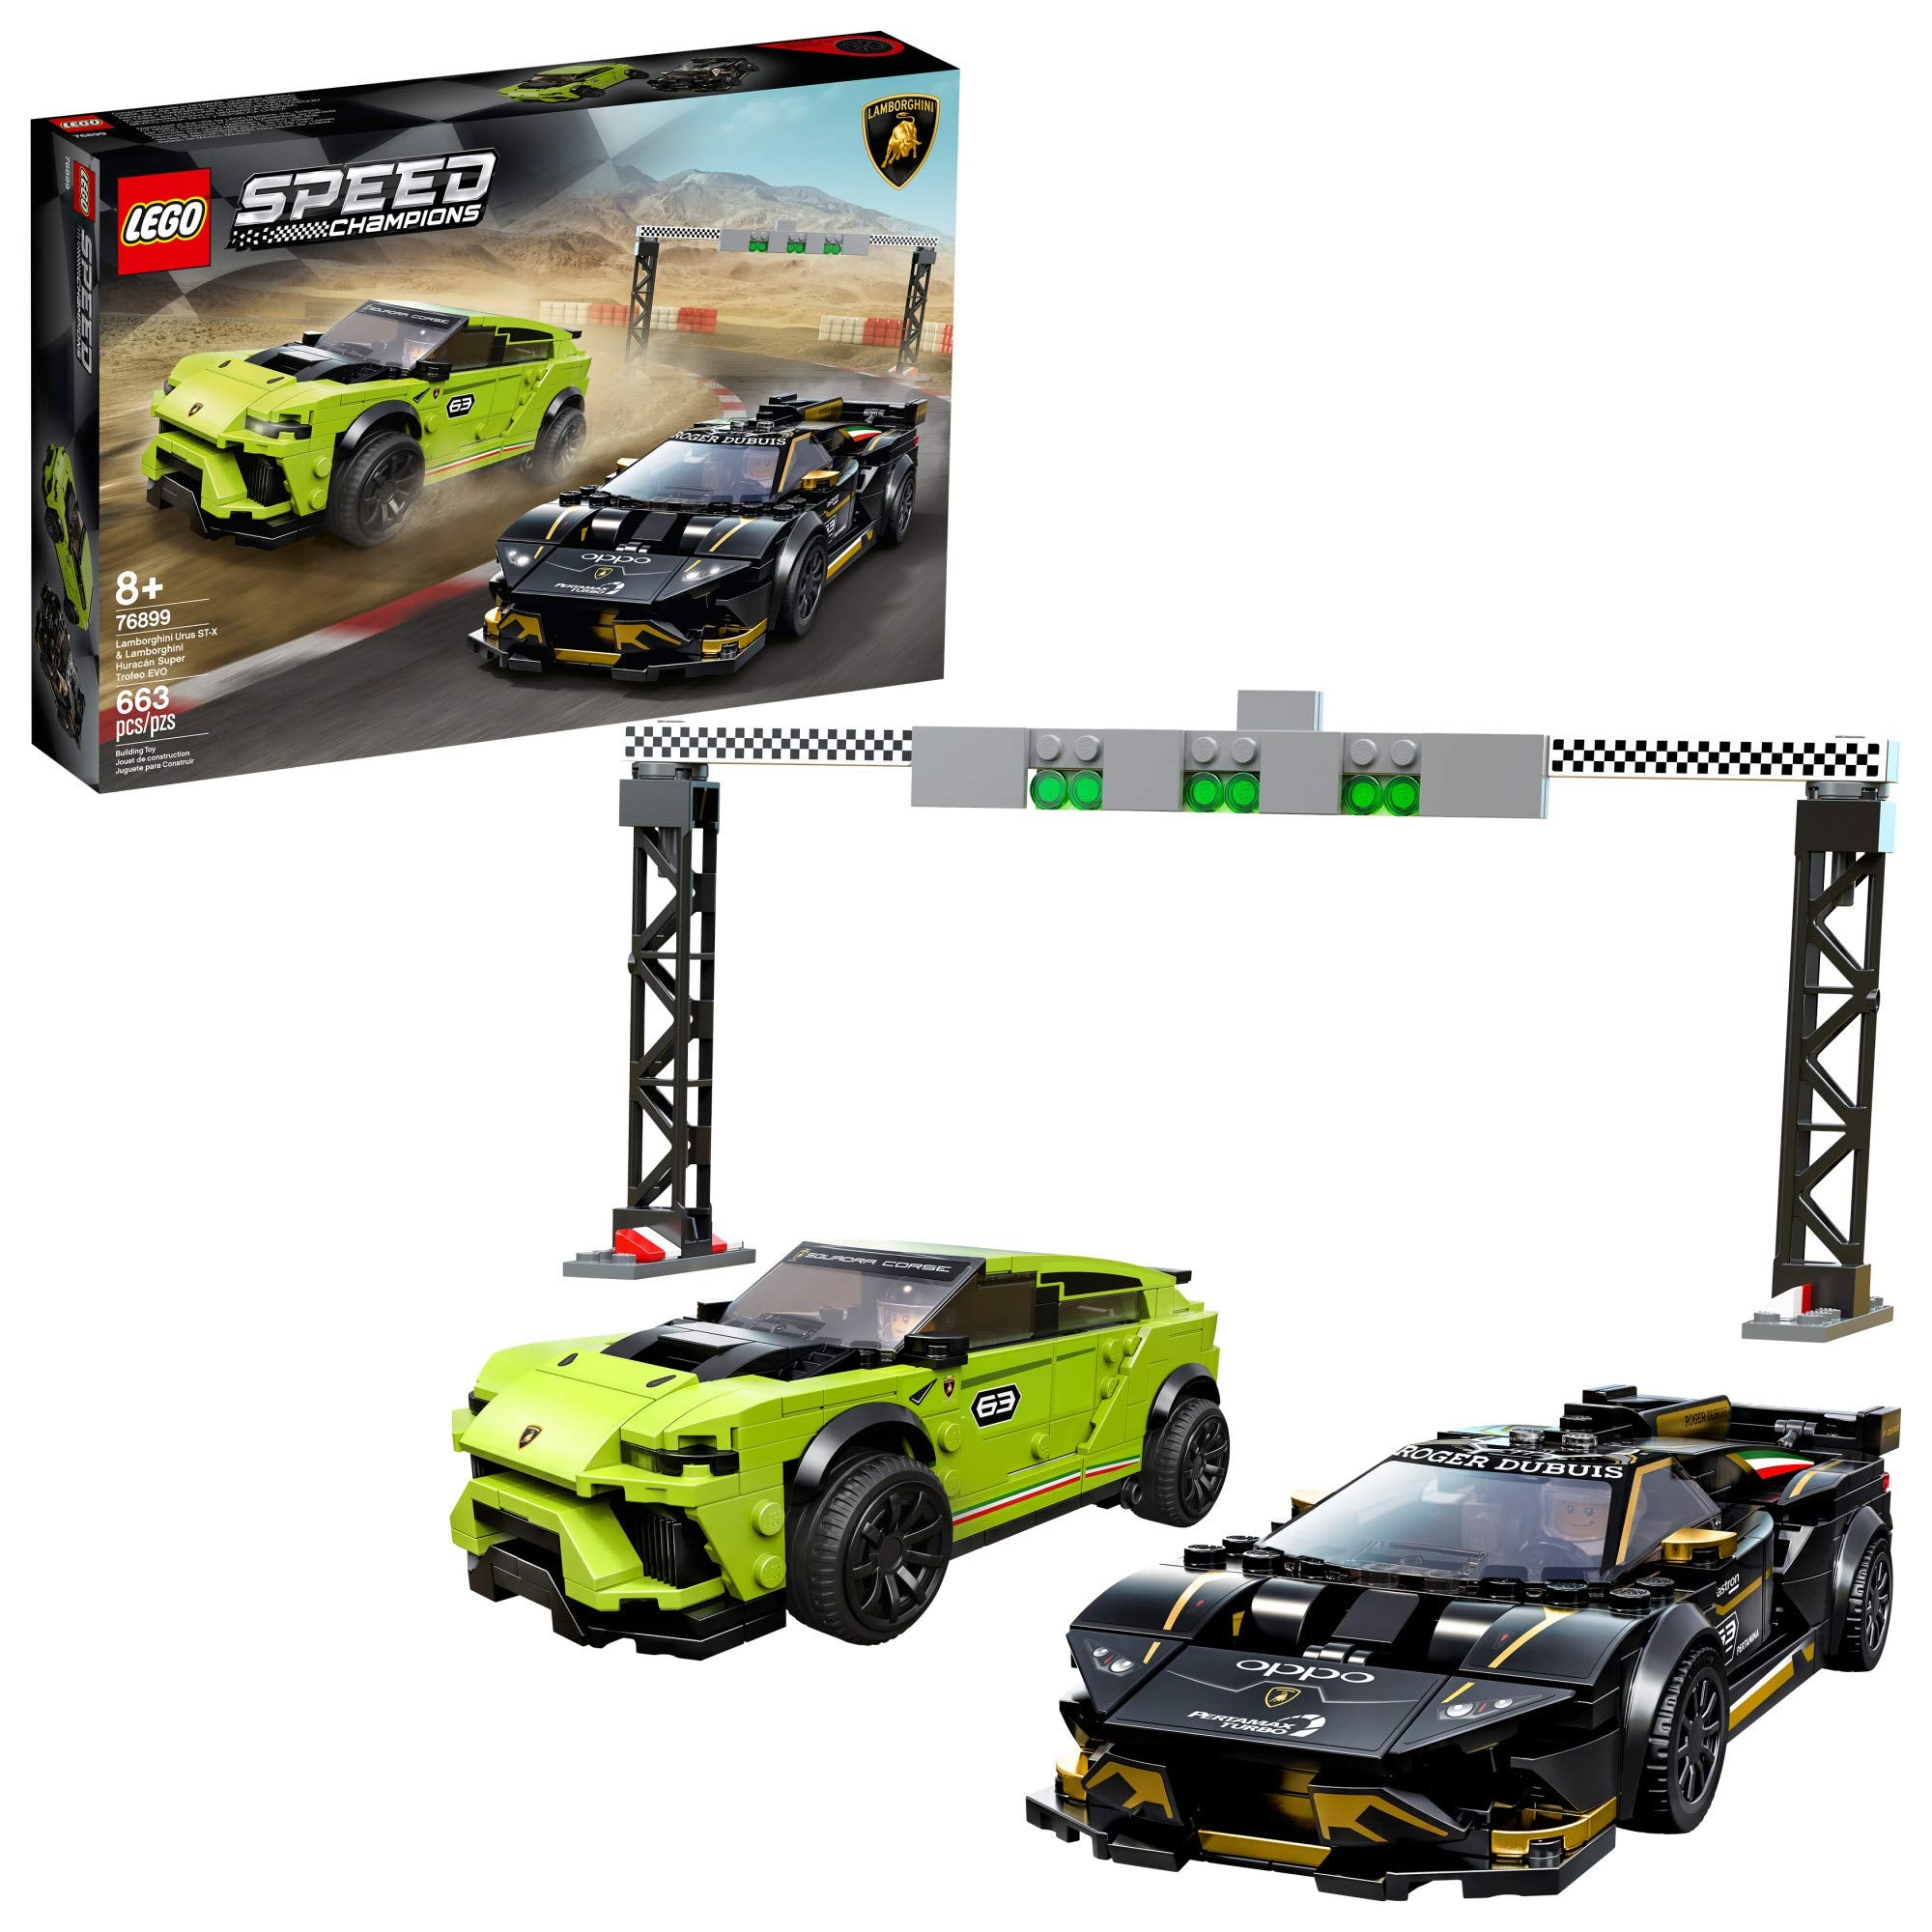 LEGO Speed Champions 1985 Audi Sport Quattro S1 76897 Toy Cars for Kids  Building Kit Featuring Driver Minifigure (250 Pieces)